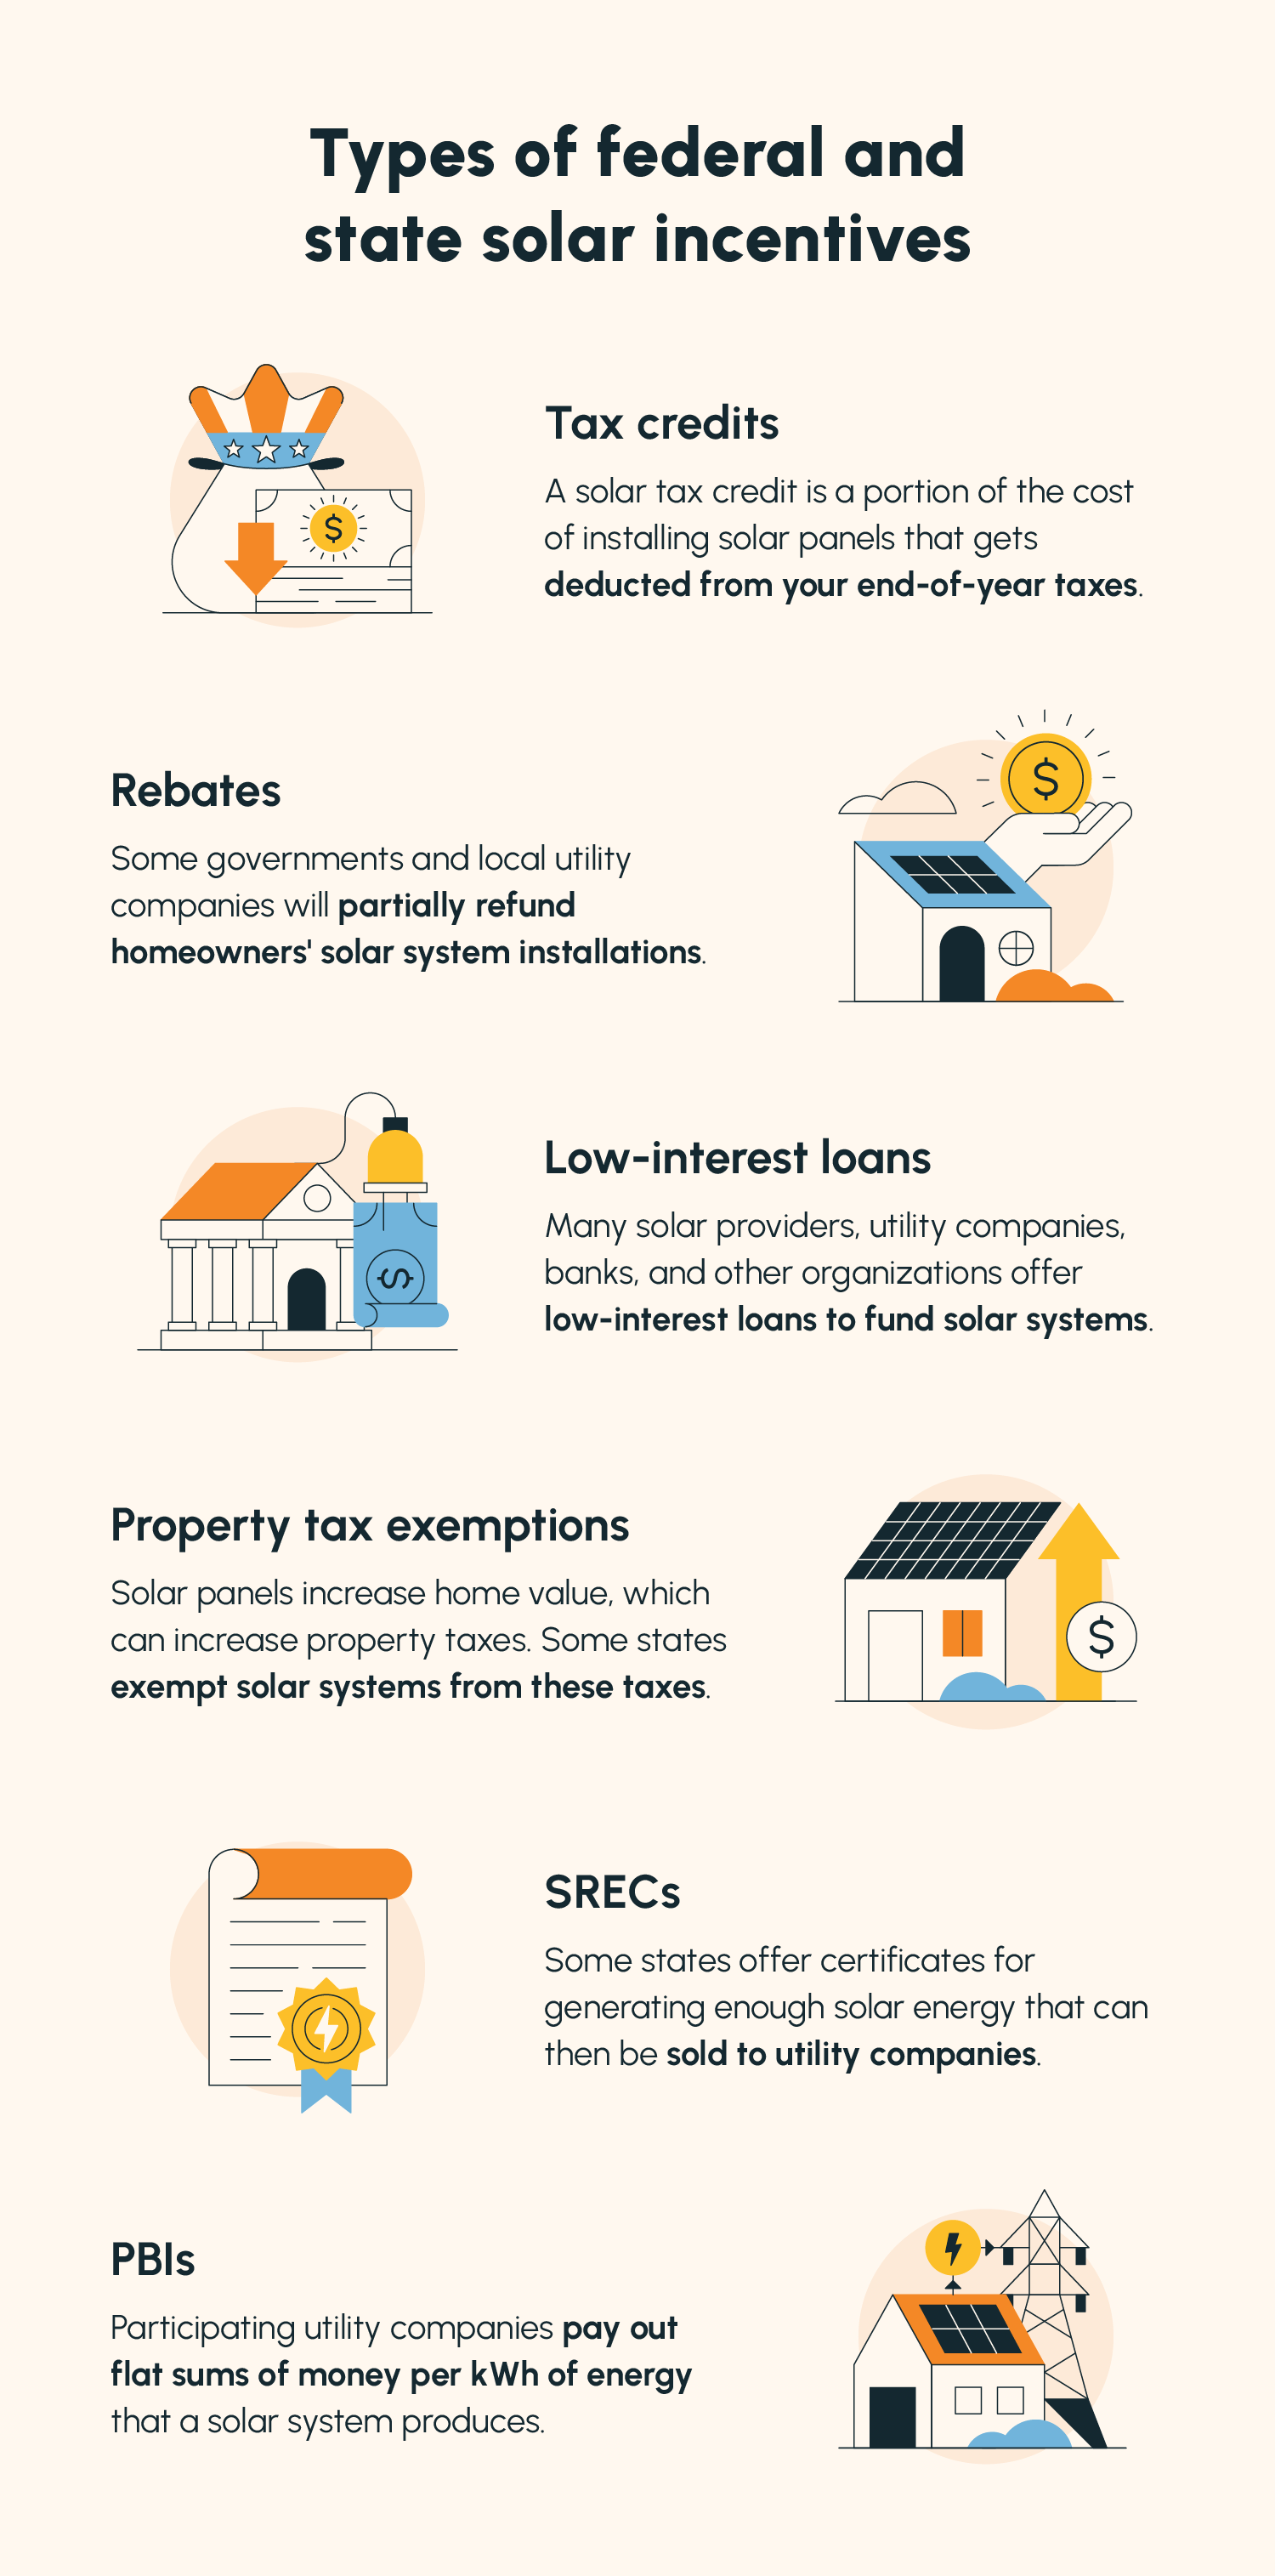 An illustrated list of the various types of federal and state solar incentives